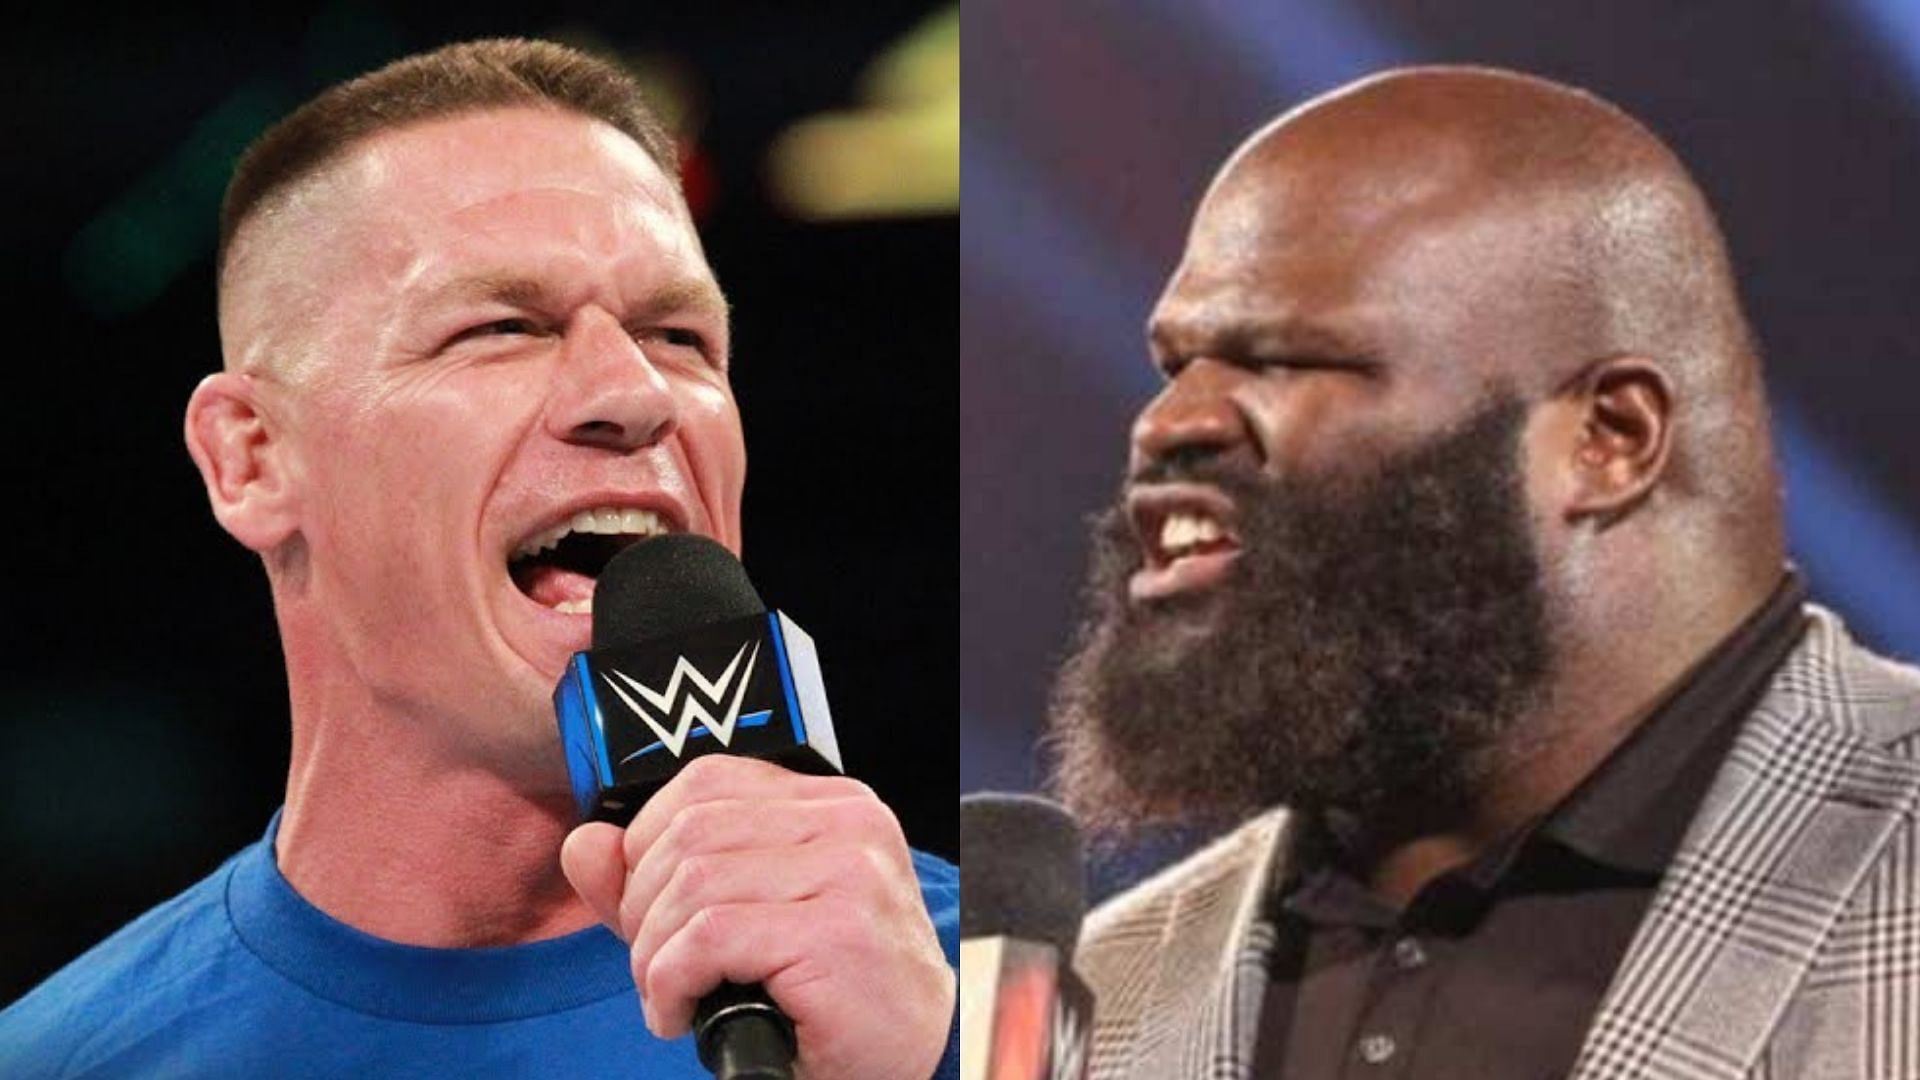 Who does Mark Henry think is better than John Cena?